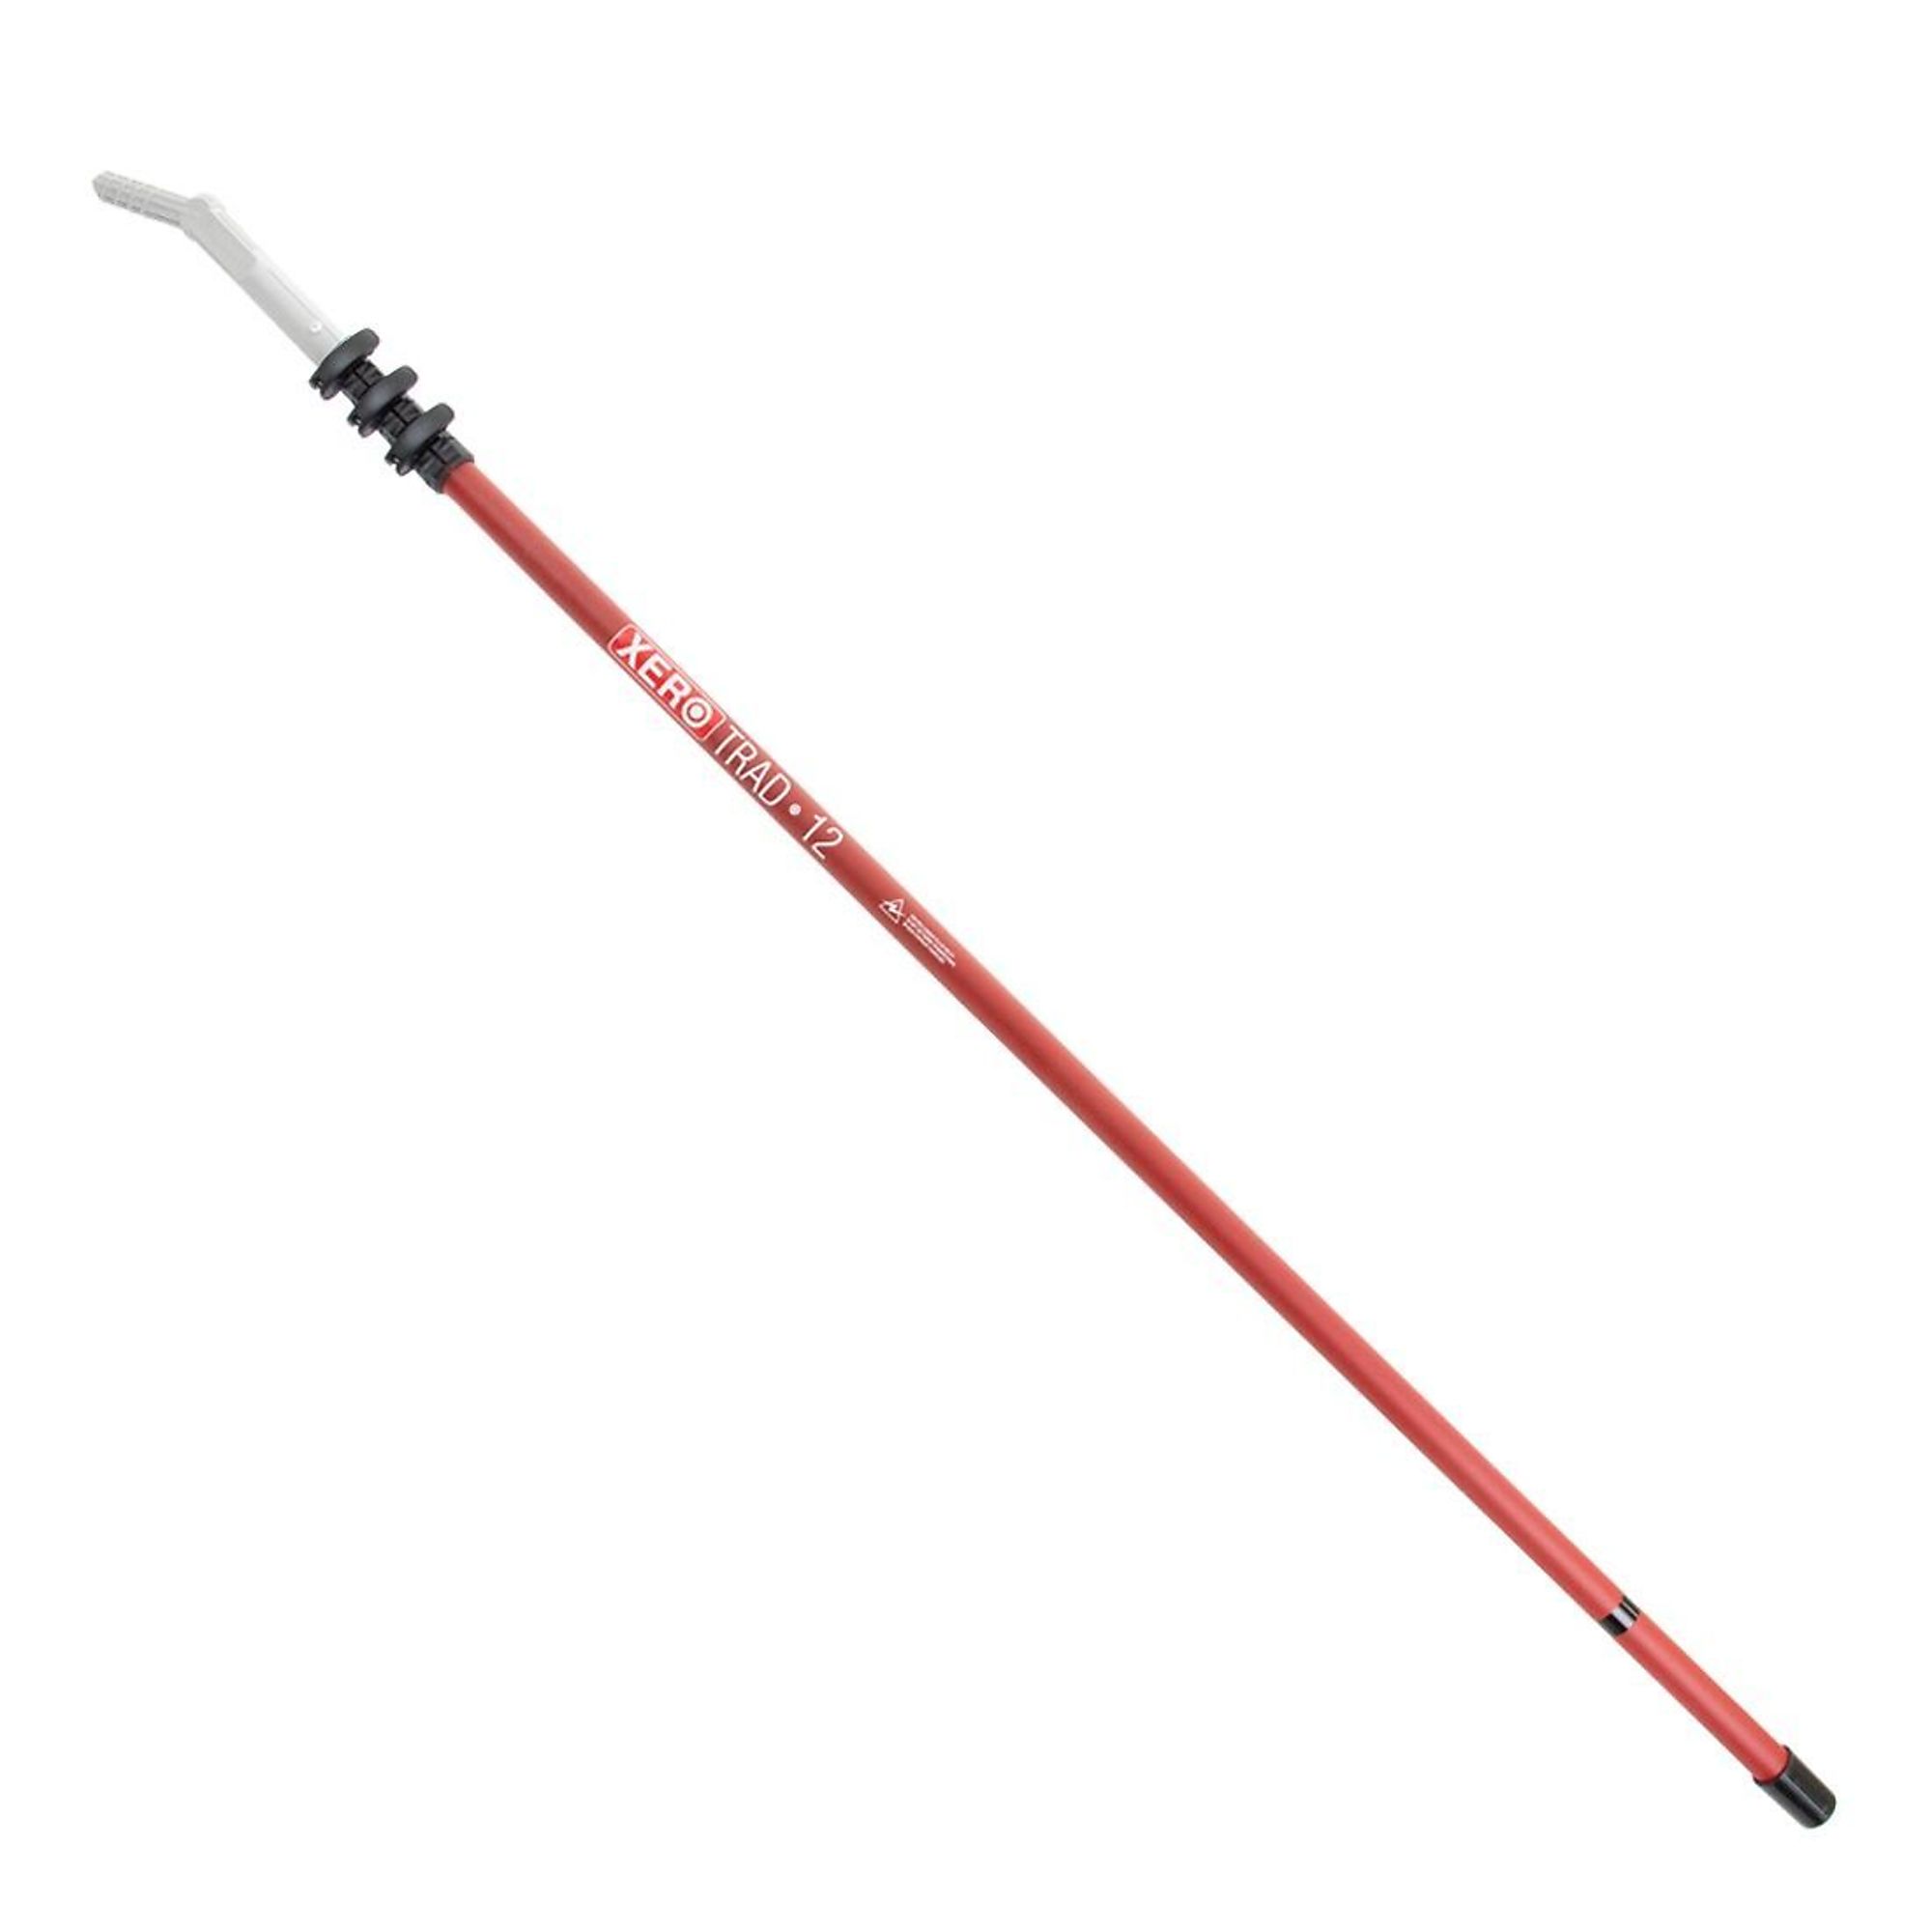 XERO, Trad Pole 2.0 Wagtail Pole Tip - Red 12ft., Model 209-20-360